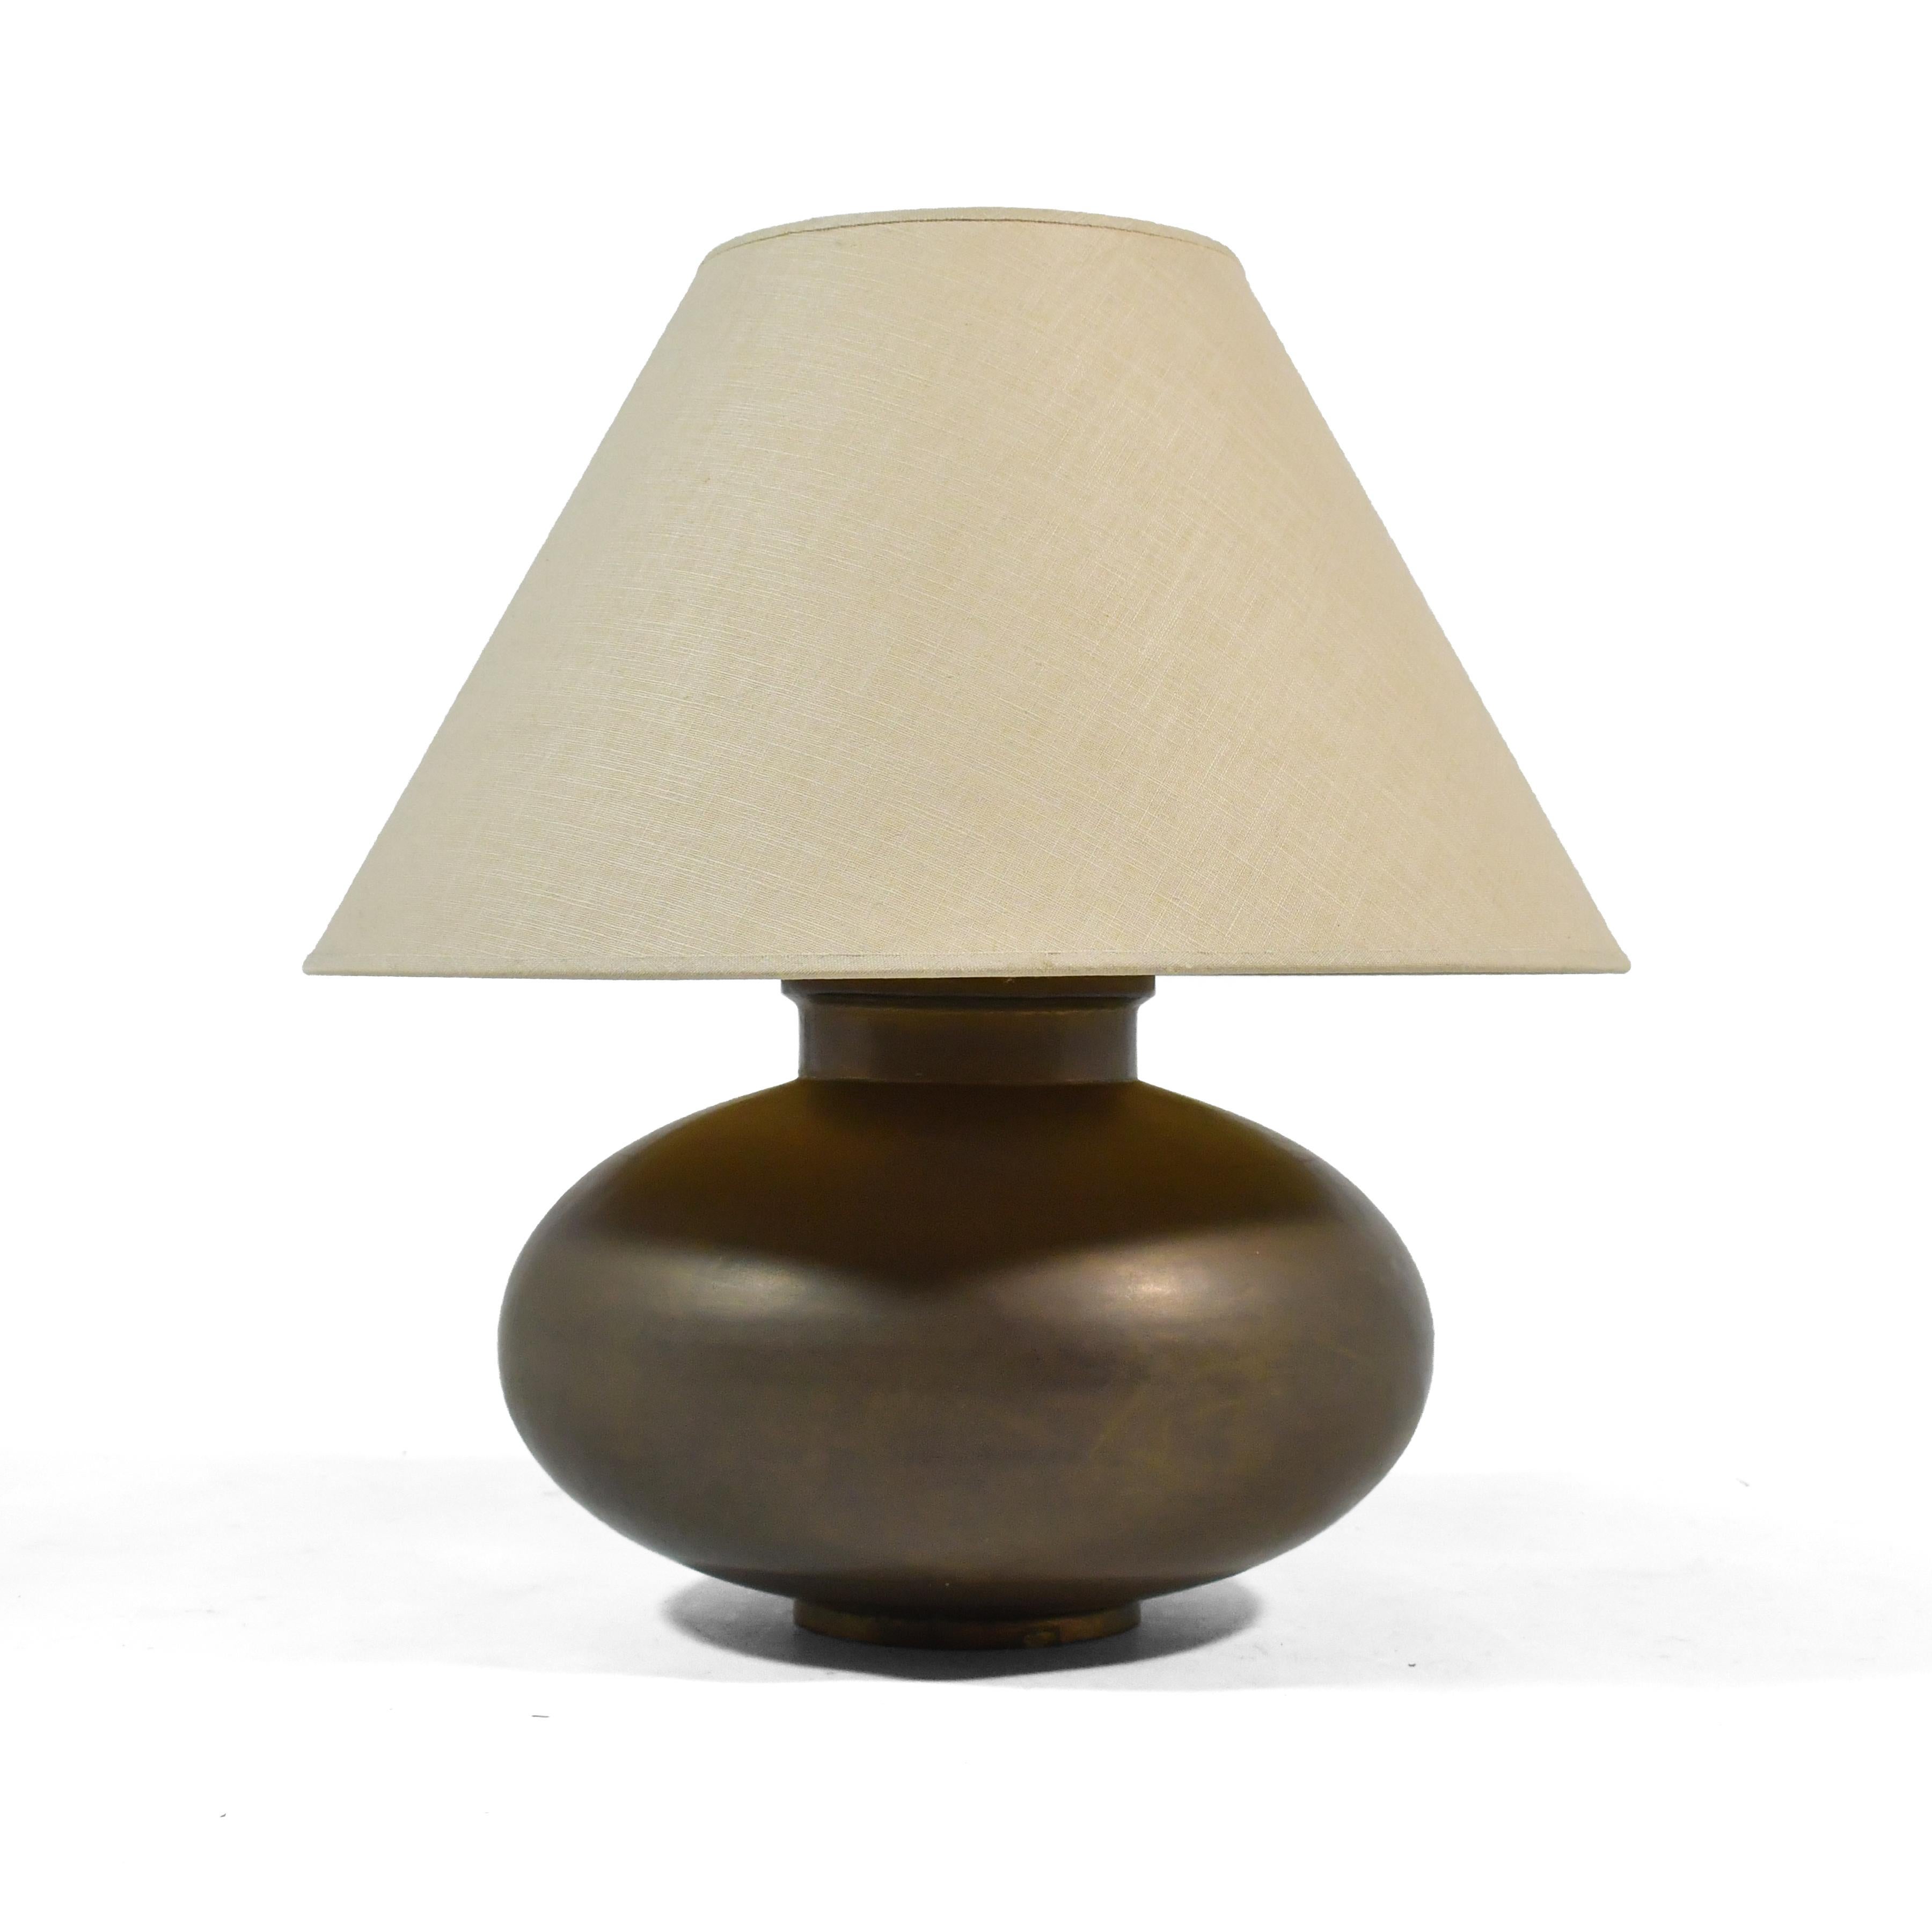 A design of subtle beauty, this table lamp has a brass base with a pleasing orb shape and a rich patina from age.

Measures: 22